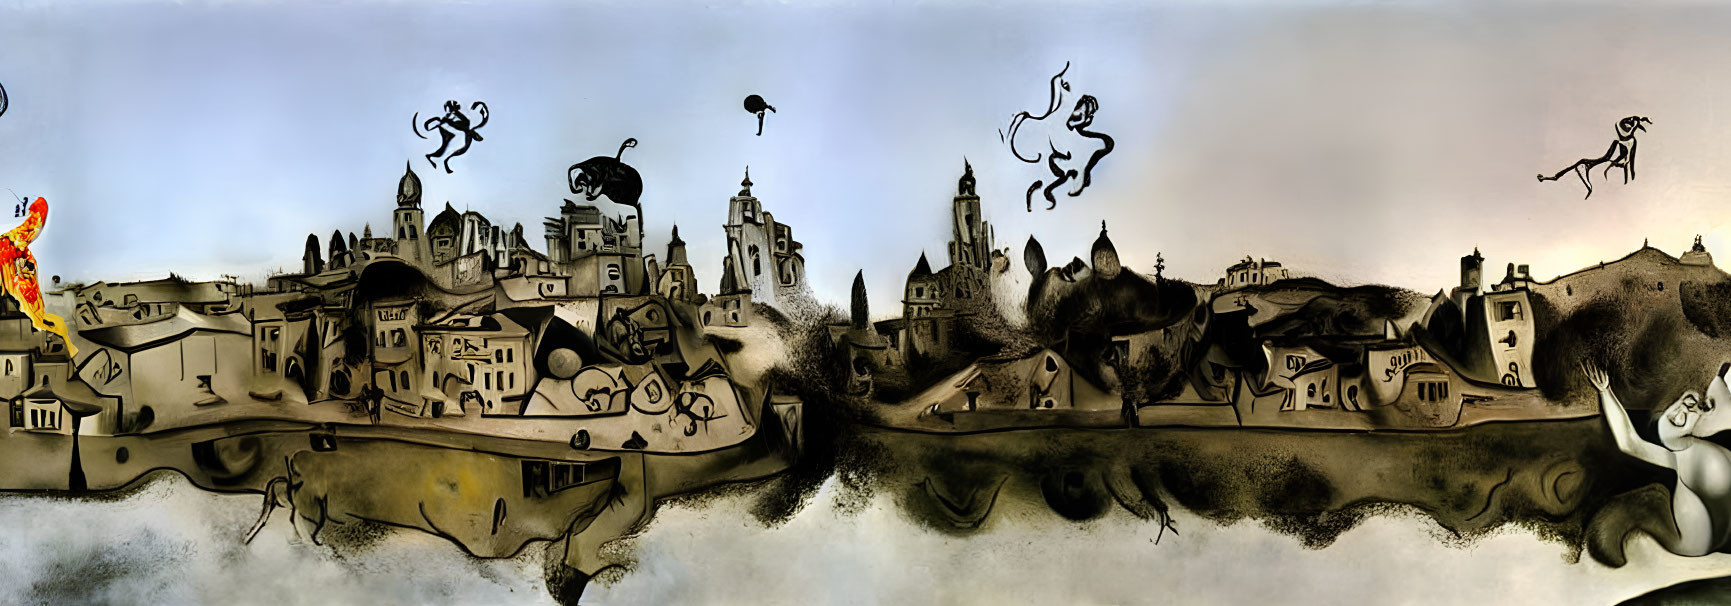 Surrealist black and white cityscape with floating silhouettes and colorful flame-licked figure